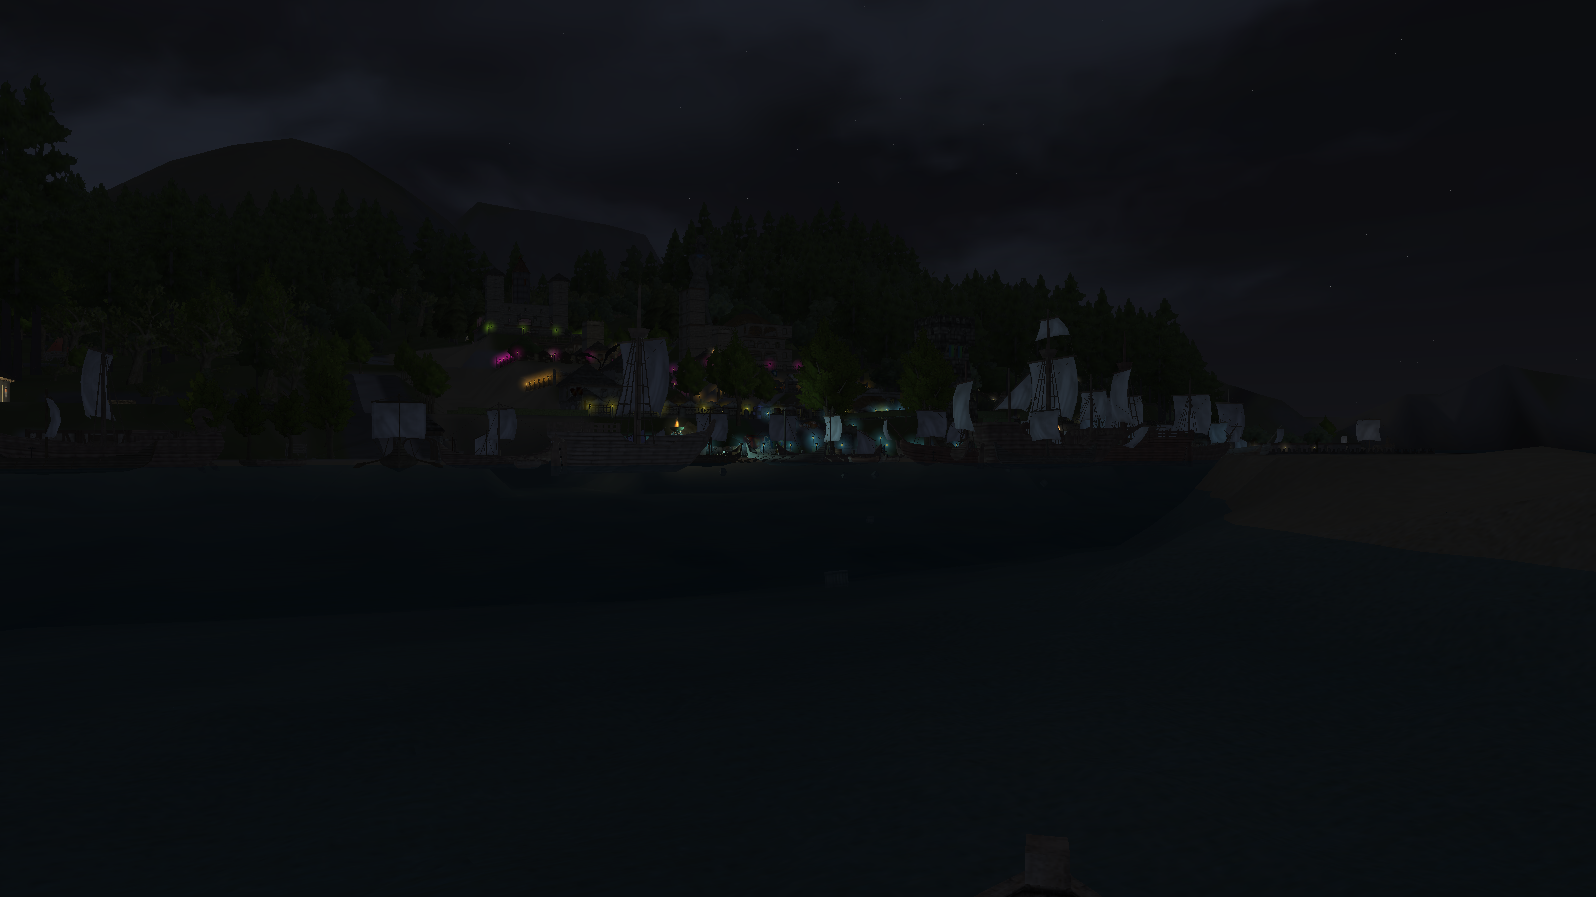 Image: Harbour at night - time to sail home